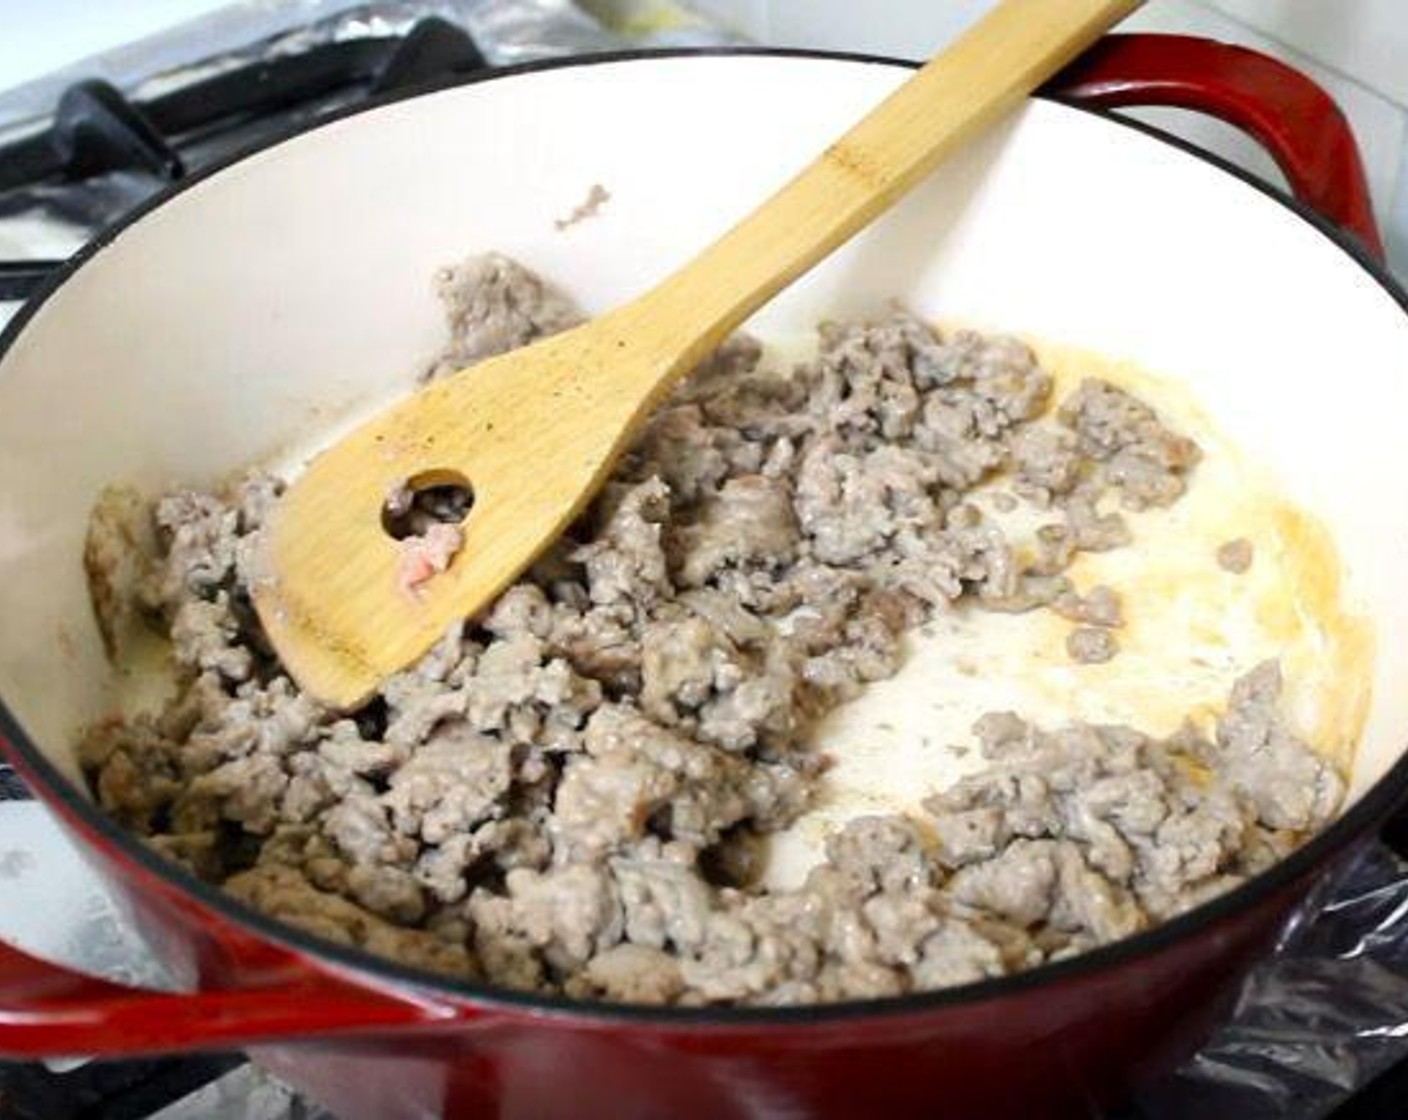 step 1 In a skillet, warm Oil (2 Tbsp). Add Ground Turkey (1 lb) and cook, stirring and breaking up the turkey with a spoon, until meat is browned, about 5-7 minutes. Season with Salt (to taste) and Ground Black Pepper (to taste).